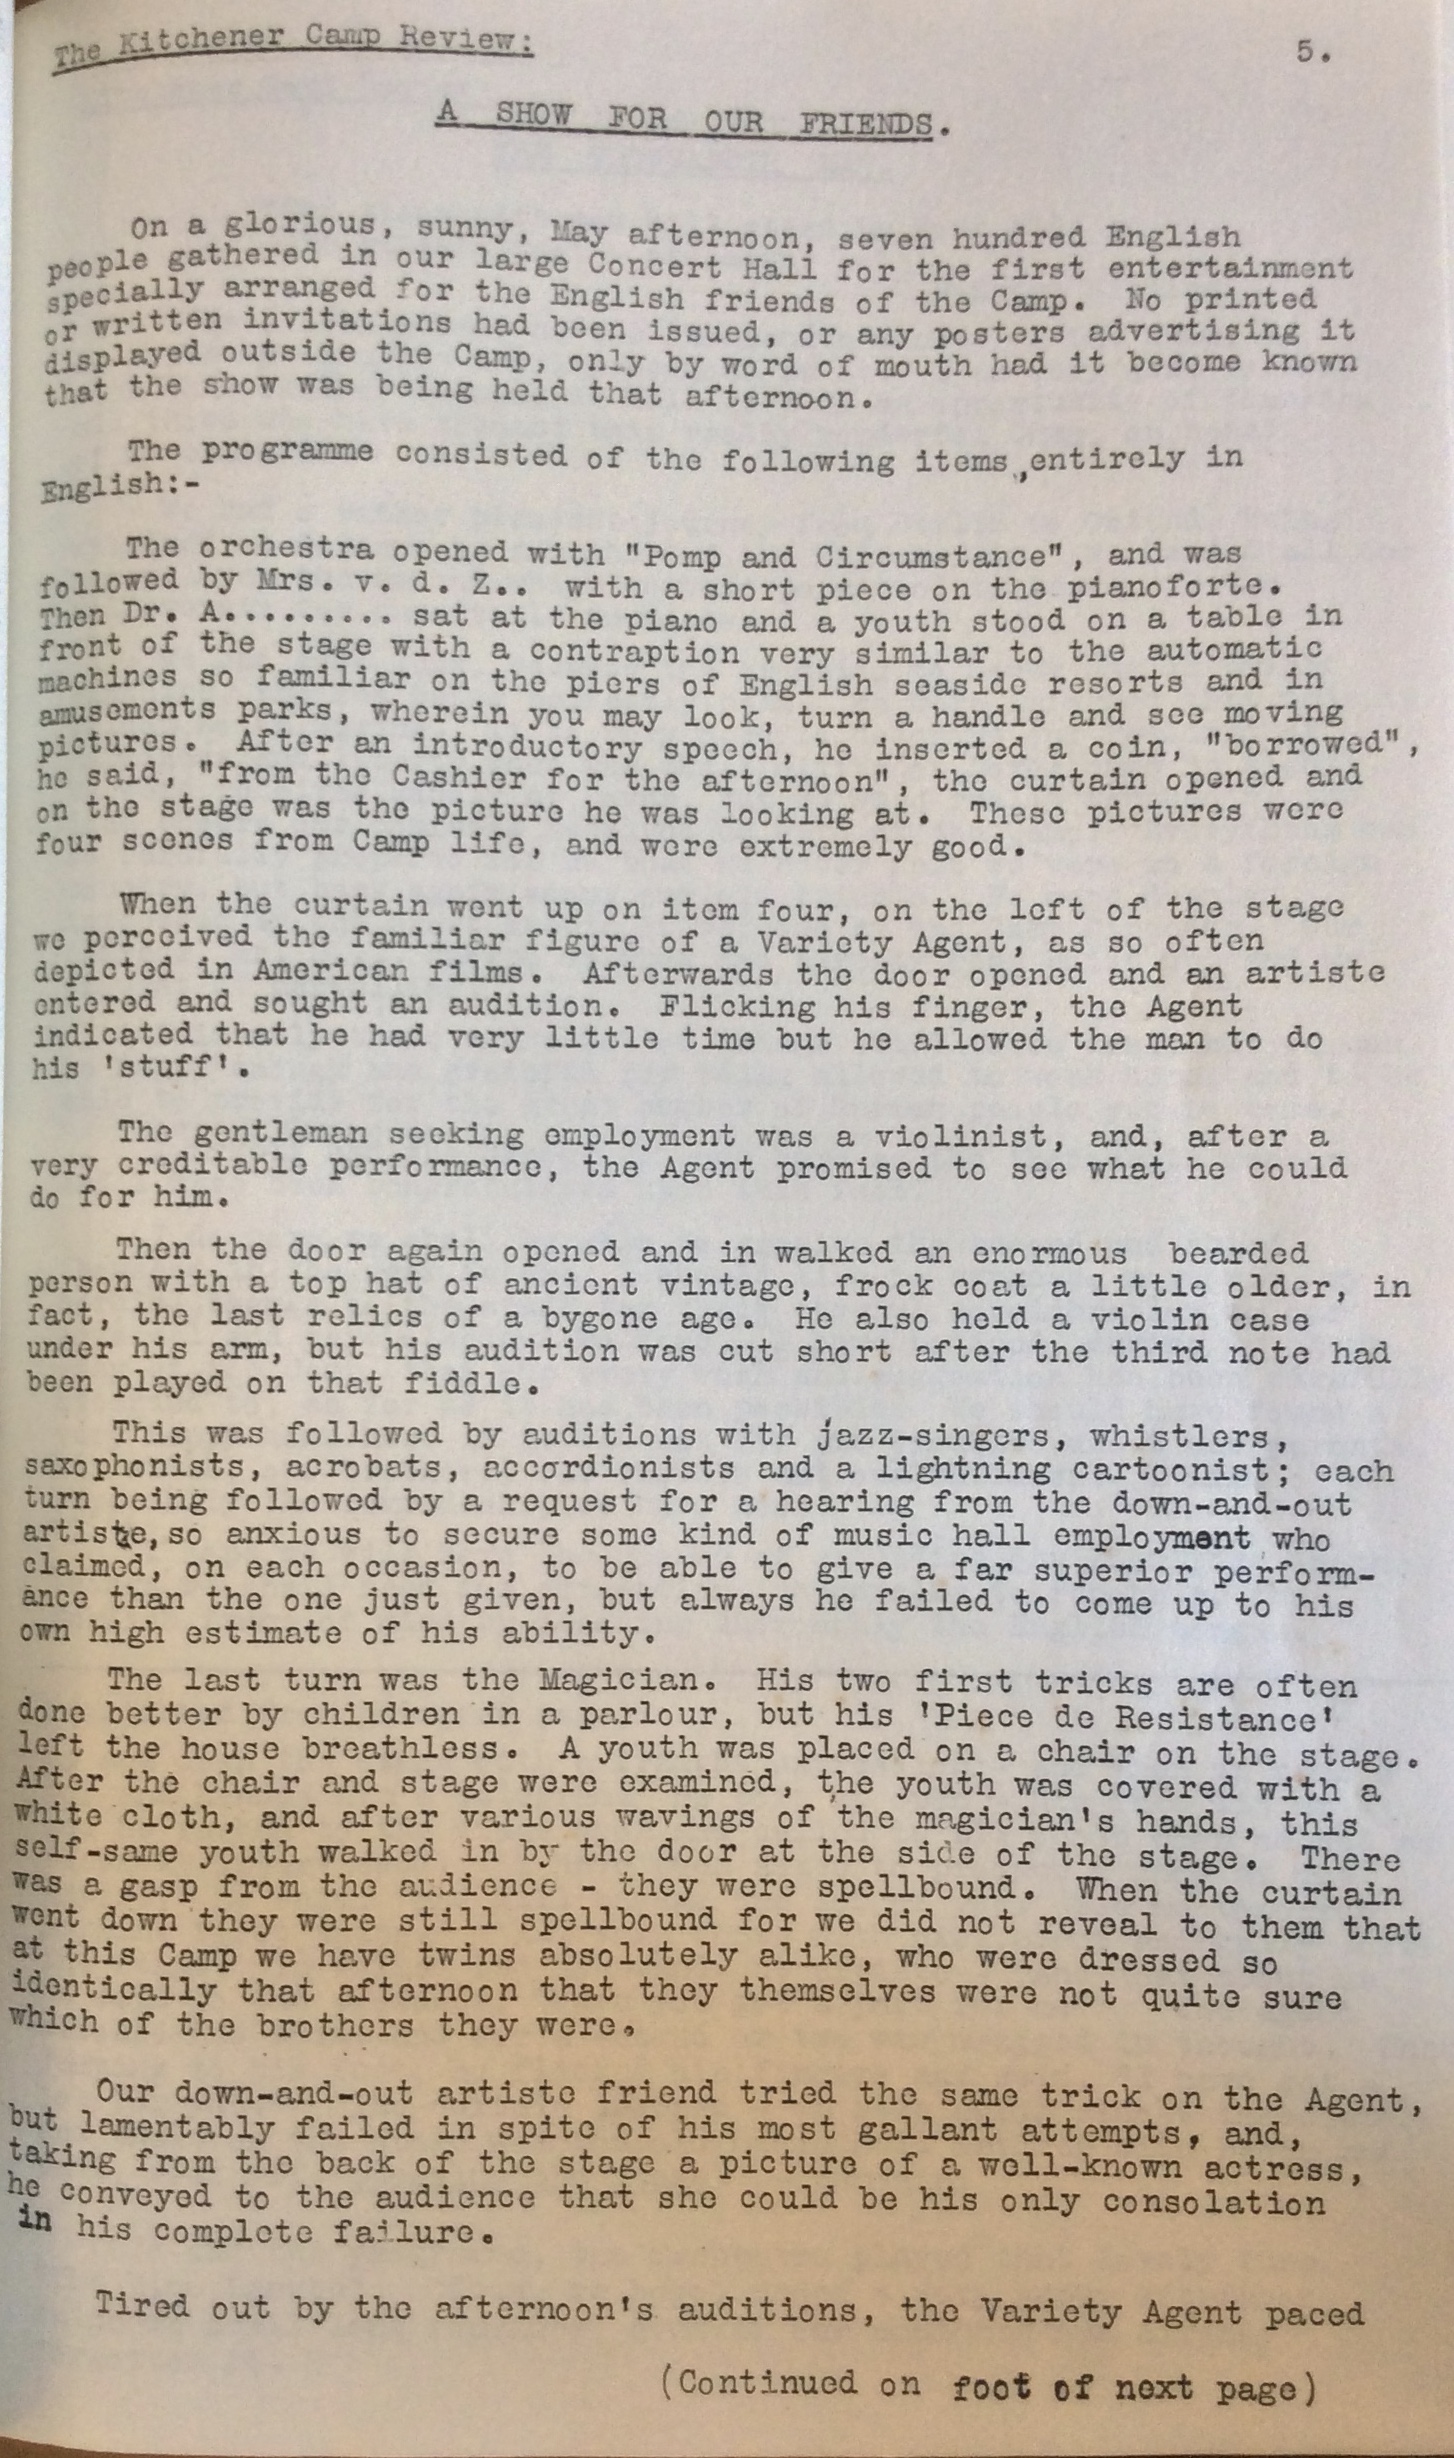 Kitchener Camp Review, June 1939, page 5